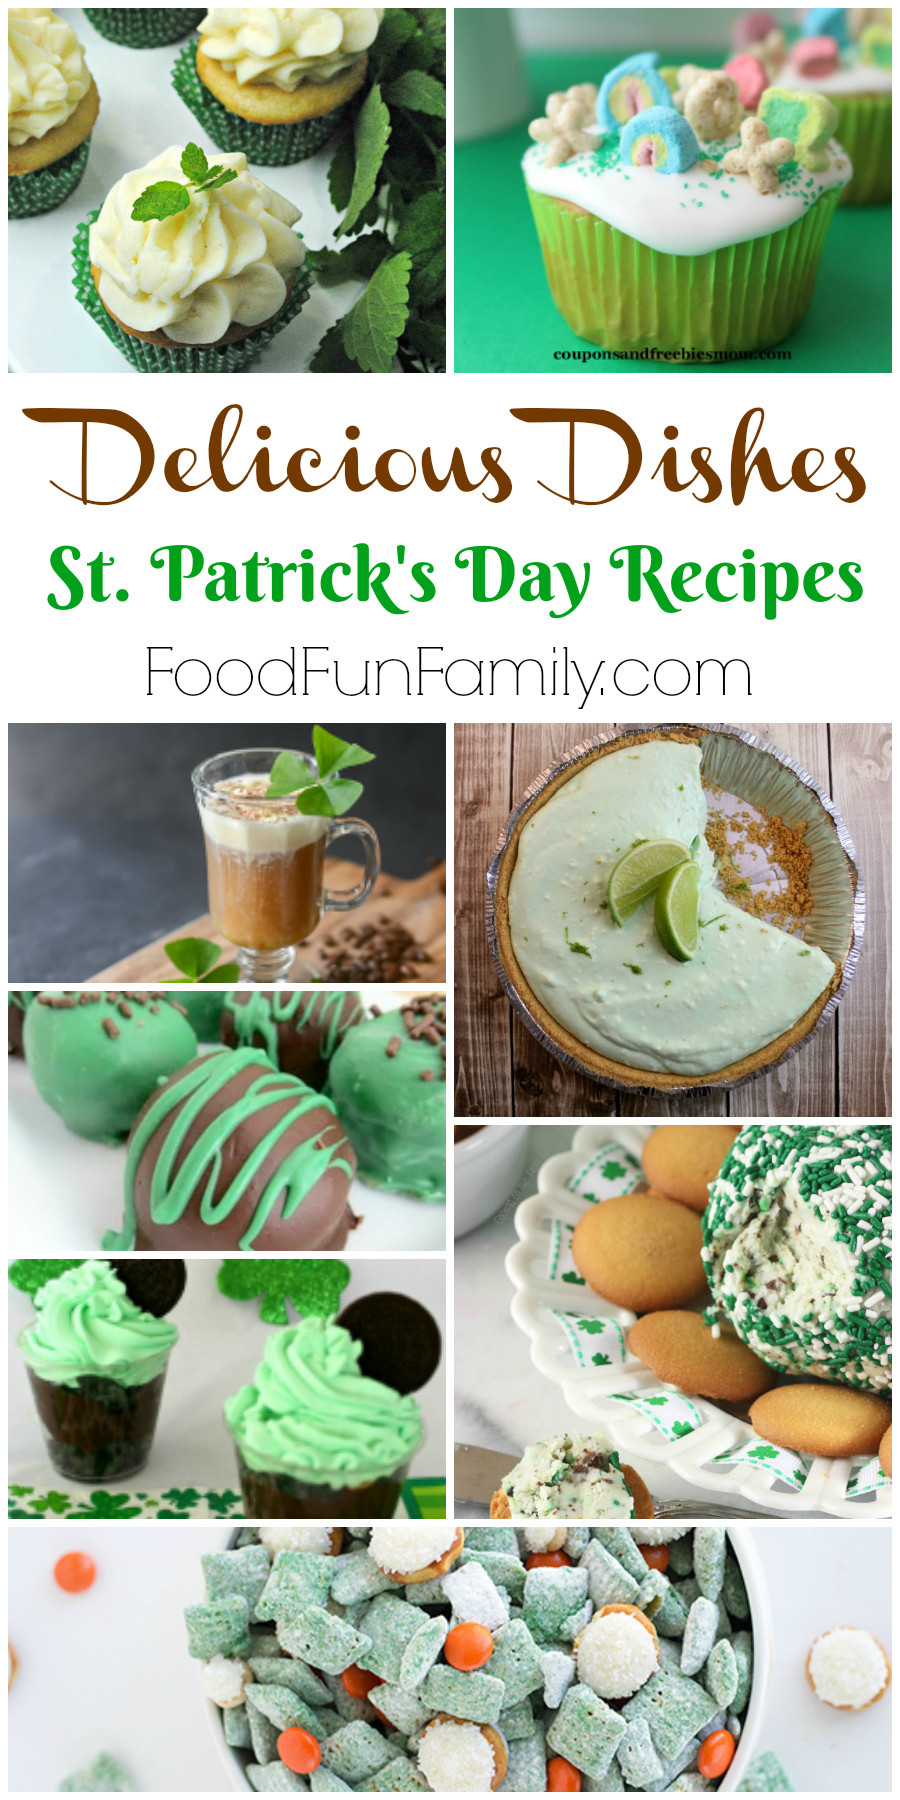 St Patrick's Day Food Recipes
 Festive St Patrick’s Day Recipes – Delicious Dishes